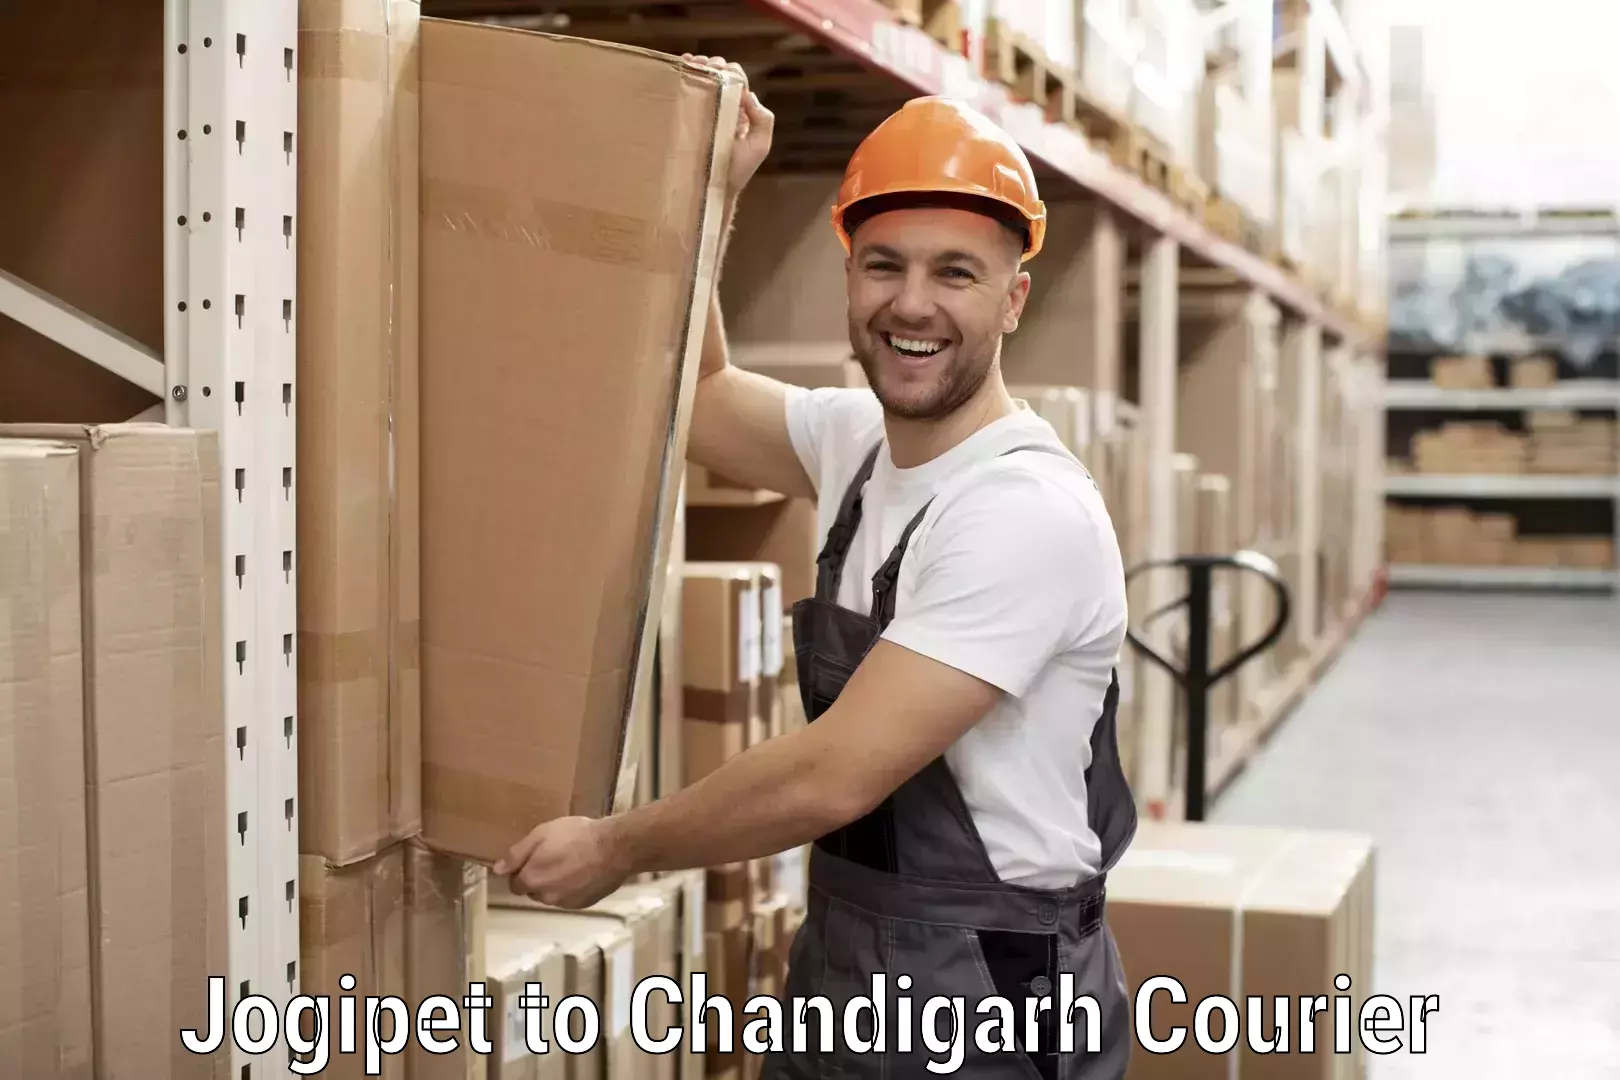 Full-service courier options Jogipet to Chandigarh